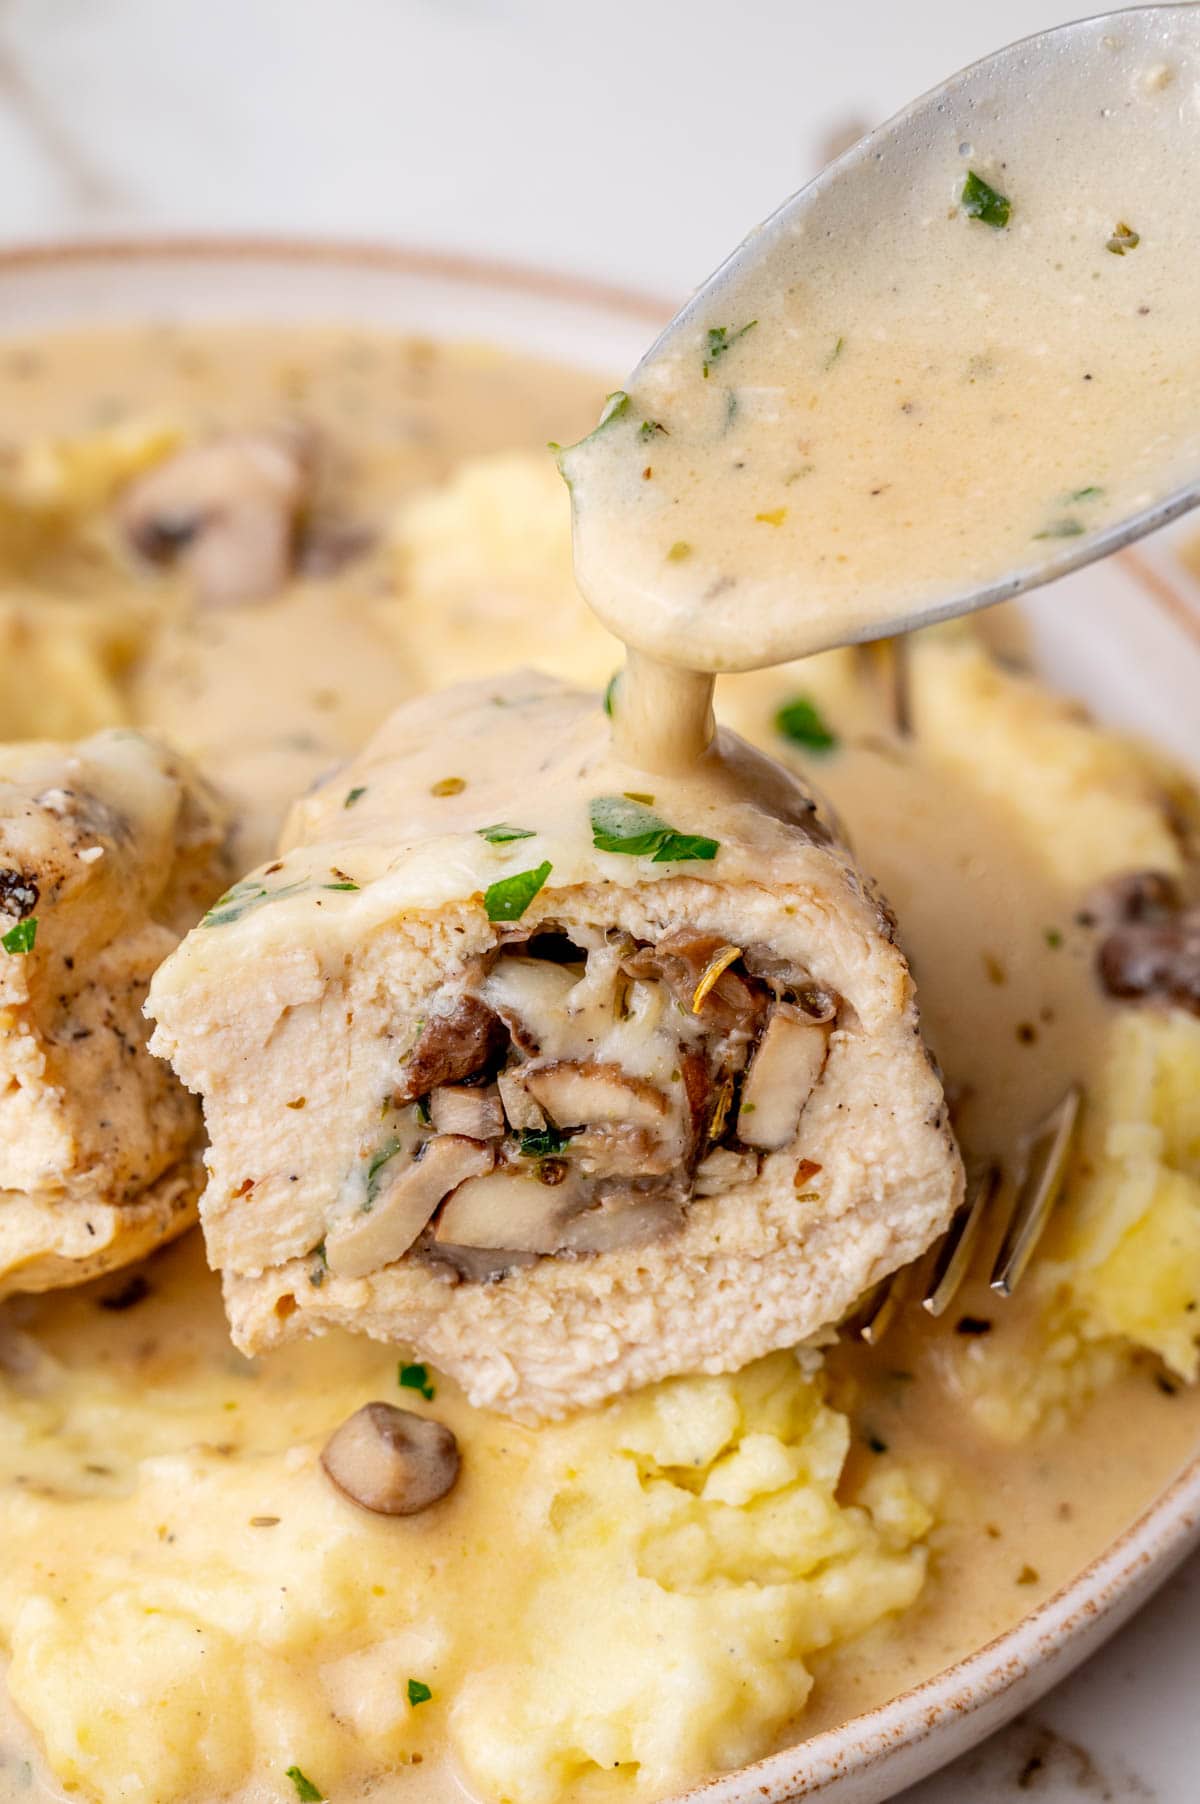 Cut in half mushroom-stuffed chicken breast and mashed potatoes are being poured with a creamy sauce.